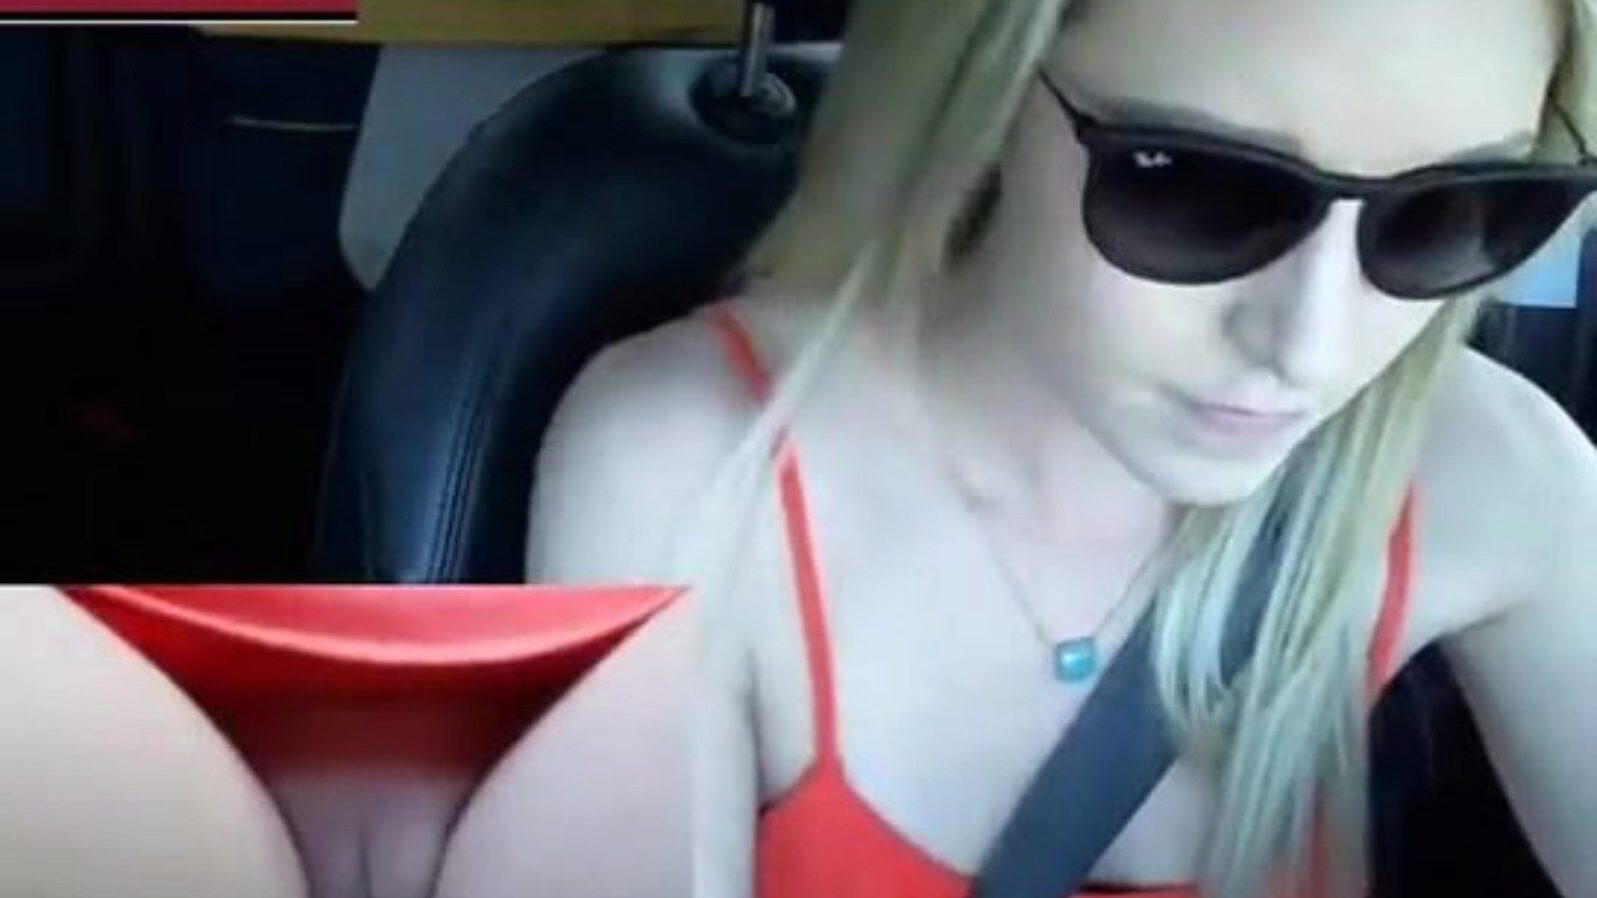 Hawt girl drains while driving on public road!